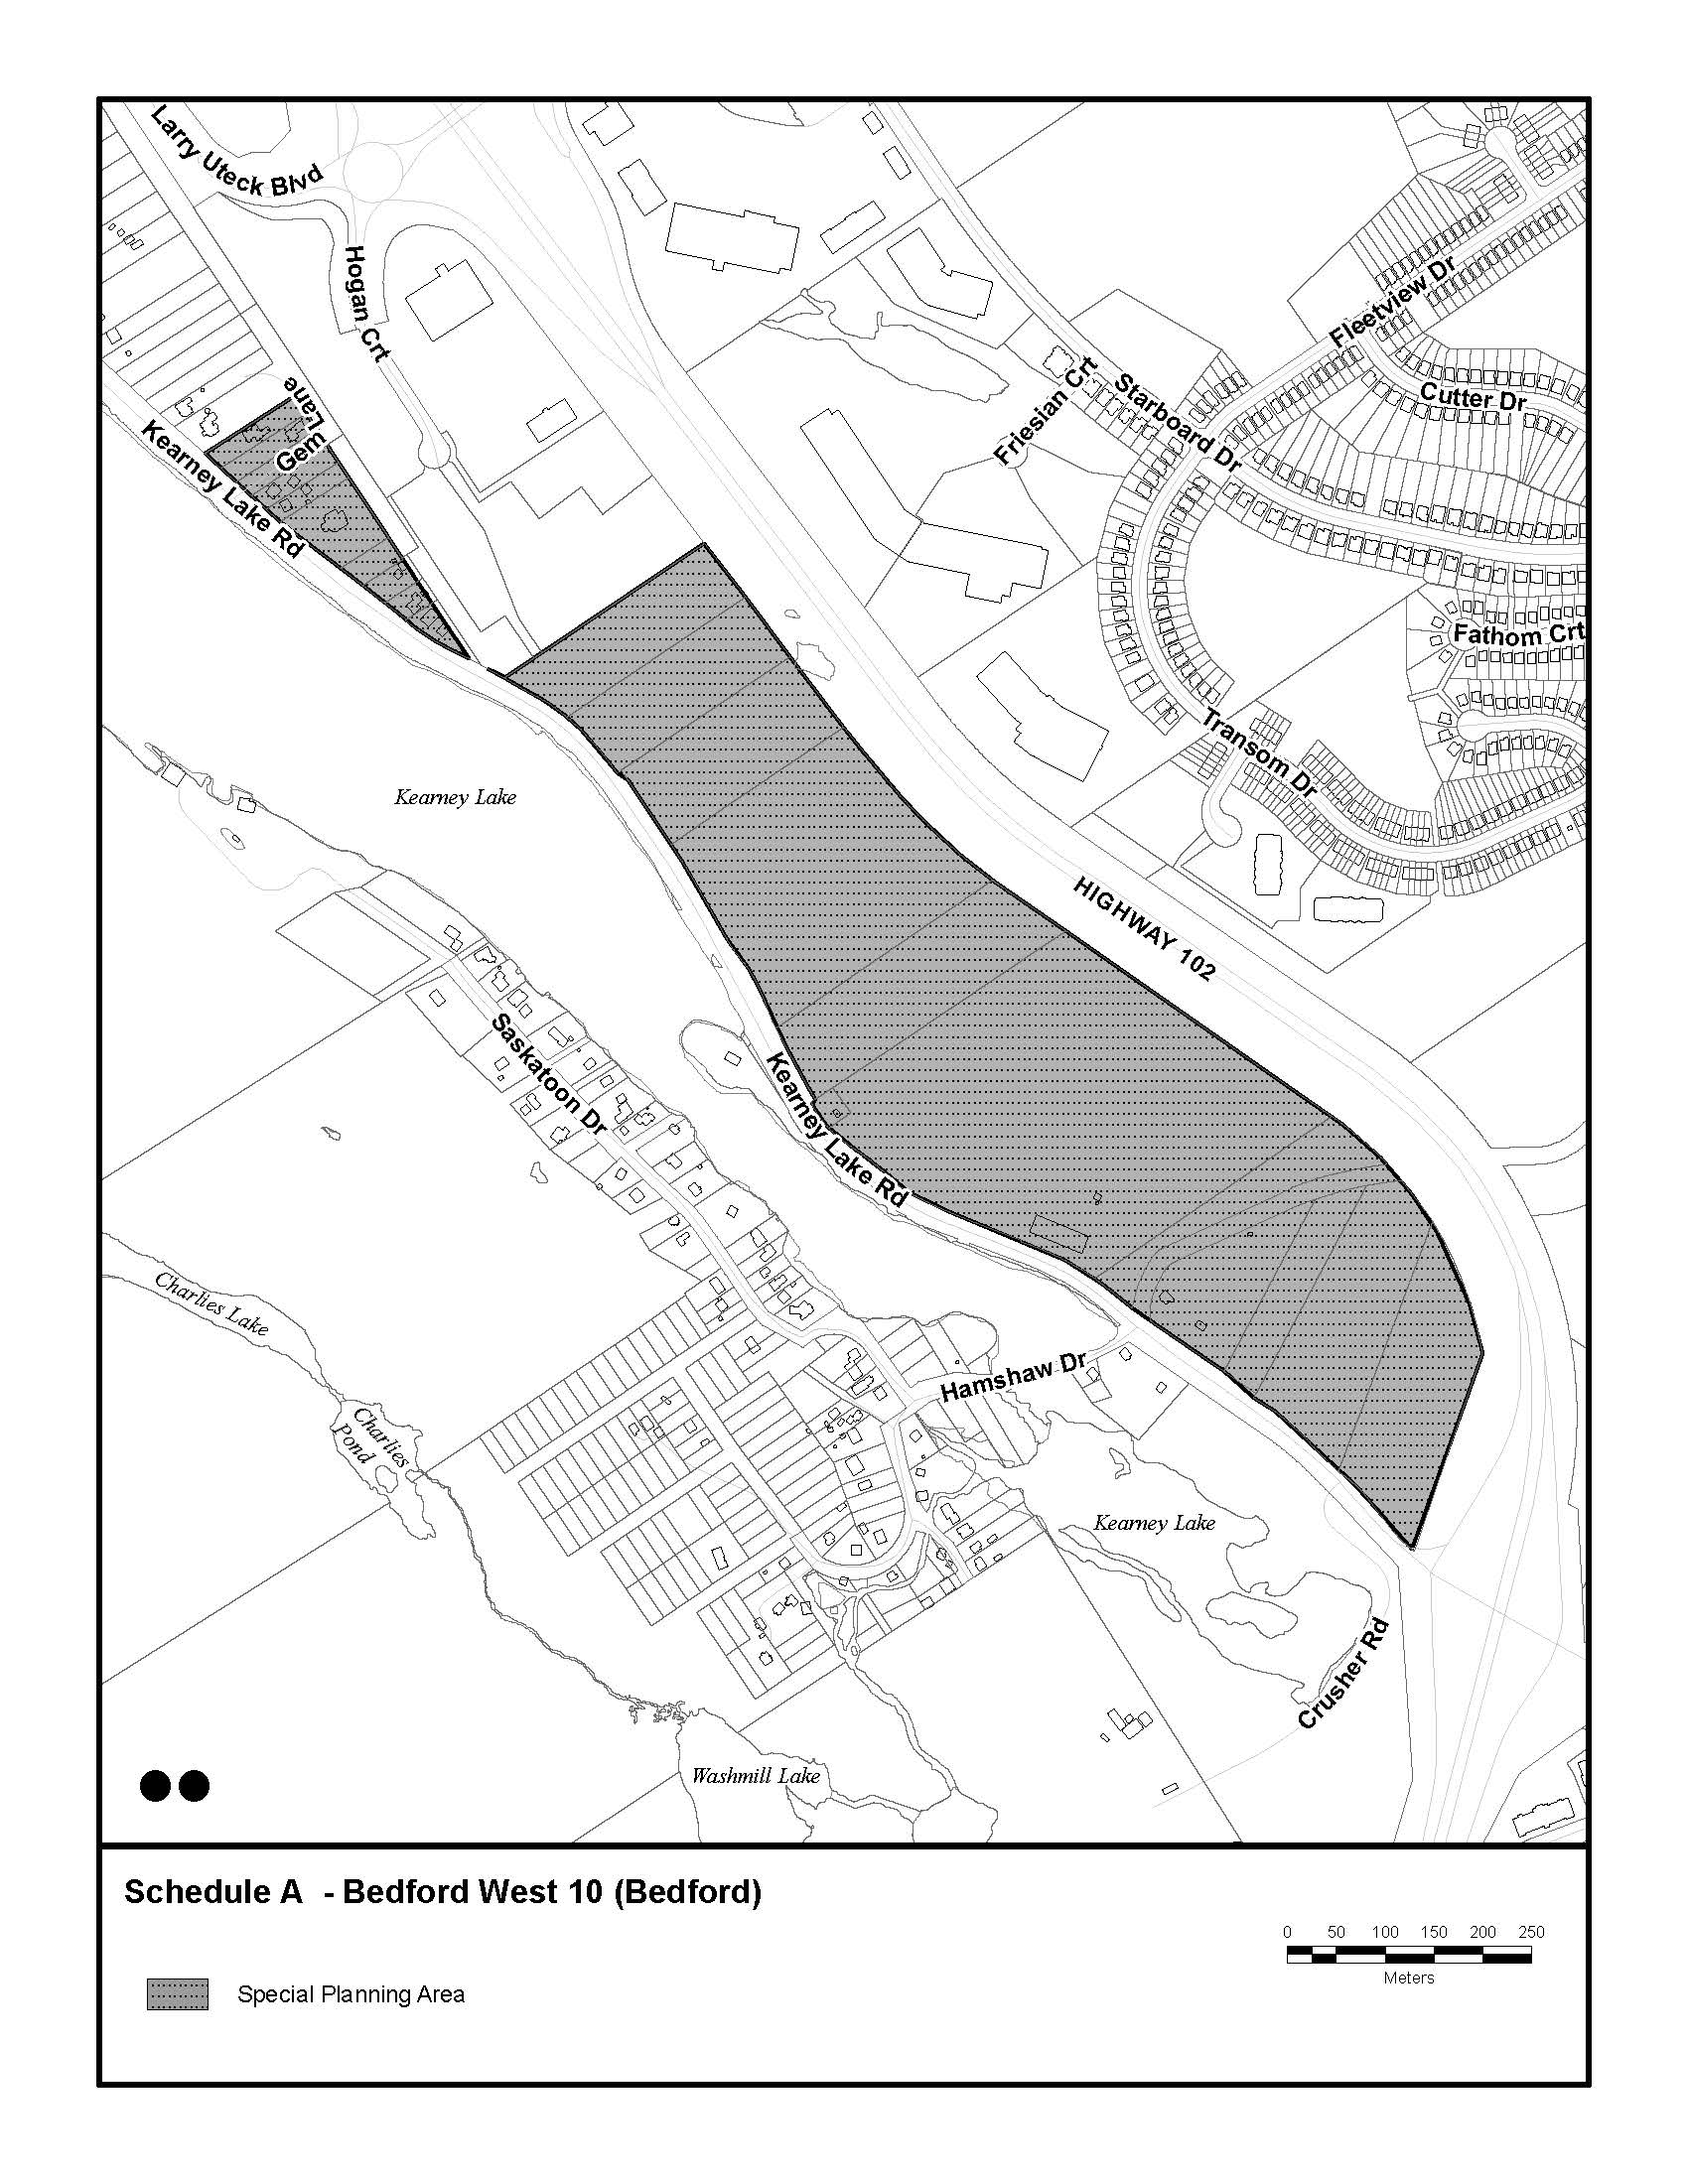 Map of Bedford West 10 Special Planning Area